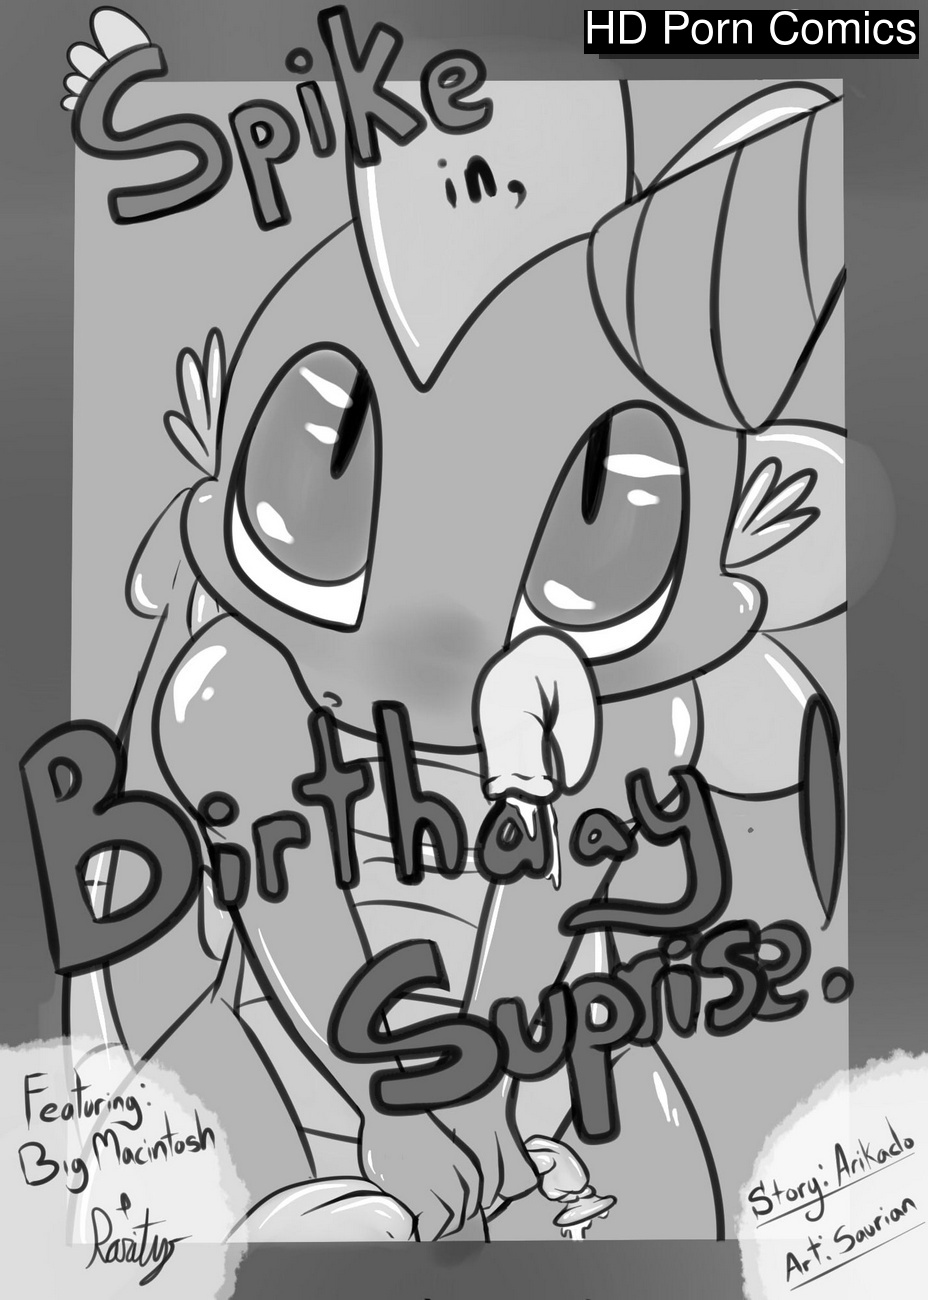 Spike In Birthday Surprise Sex Comic HD Porn Comics picture